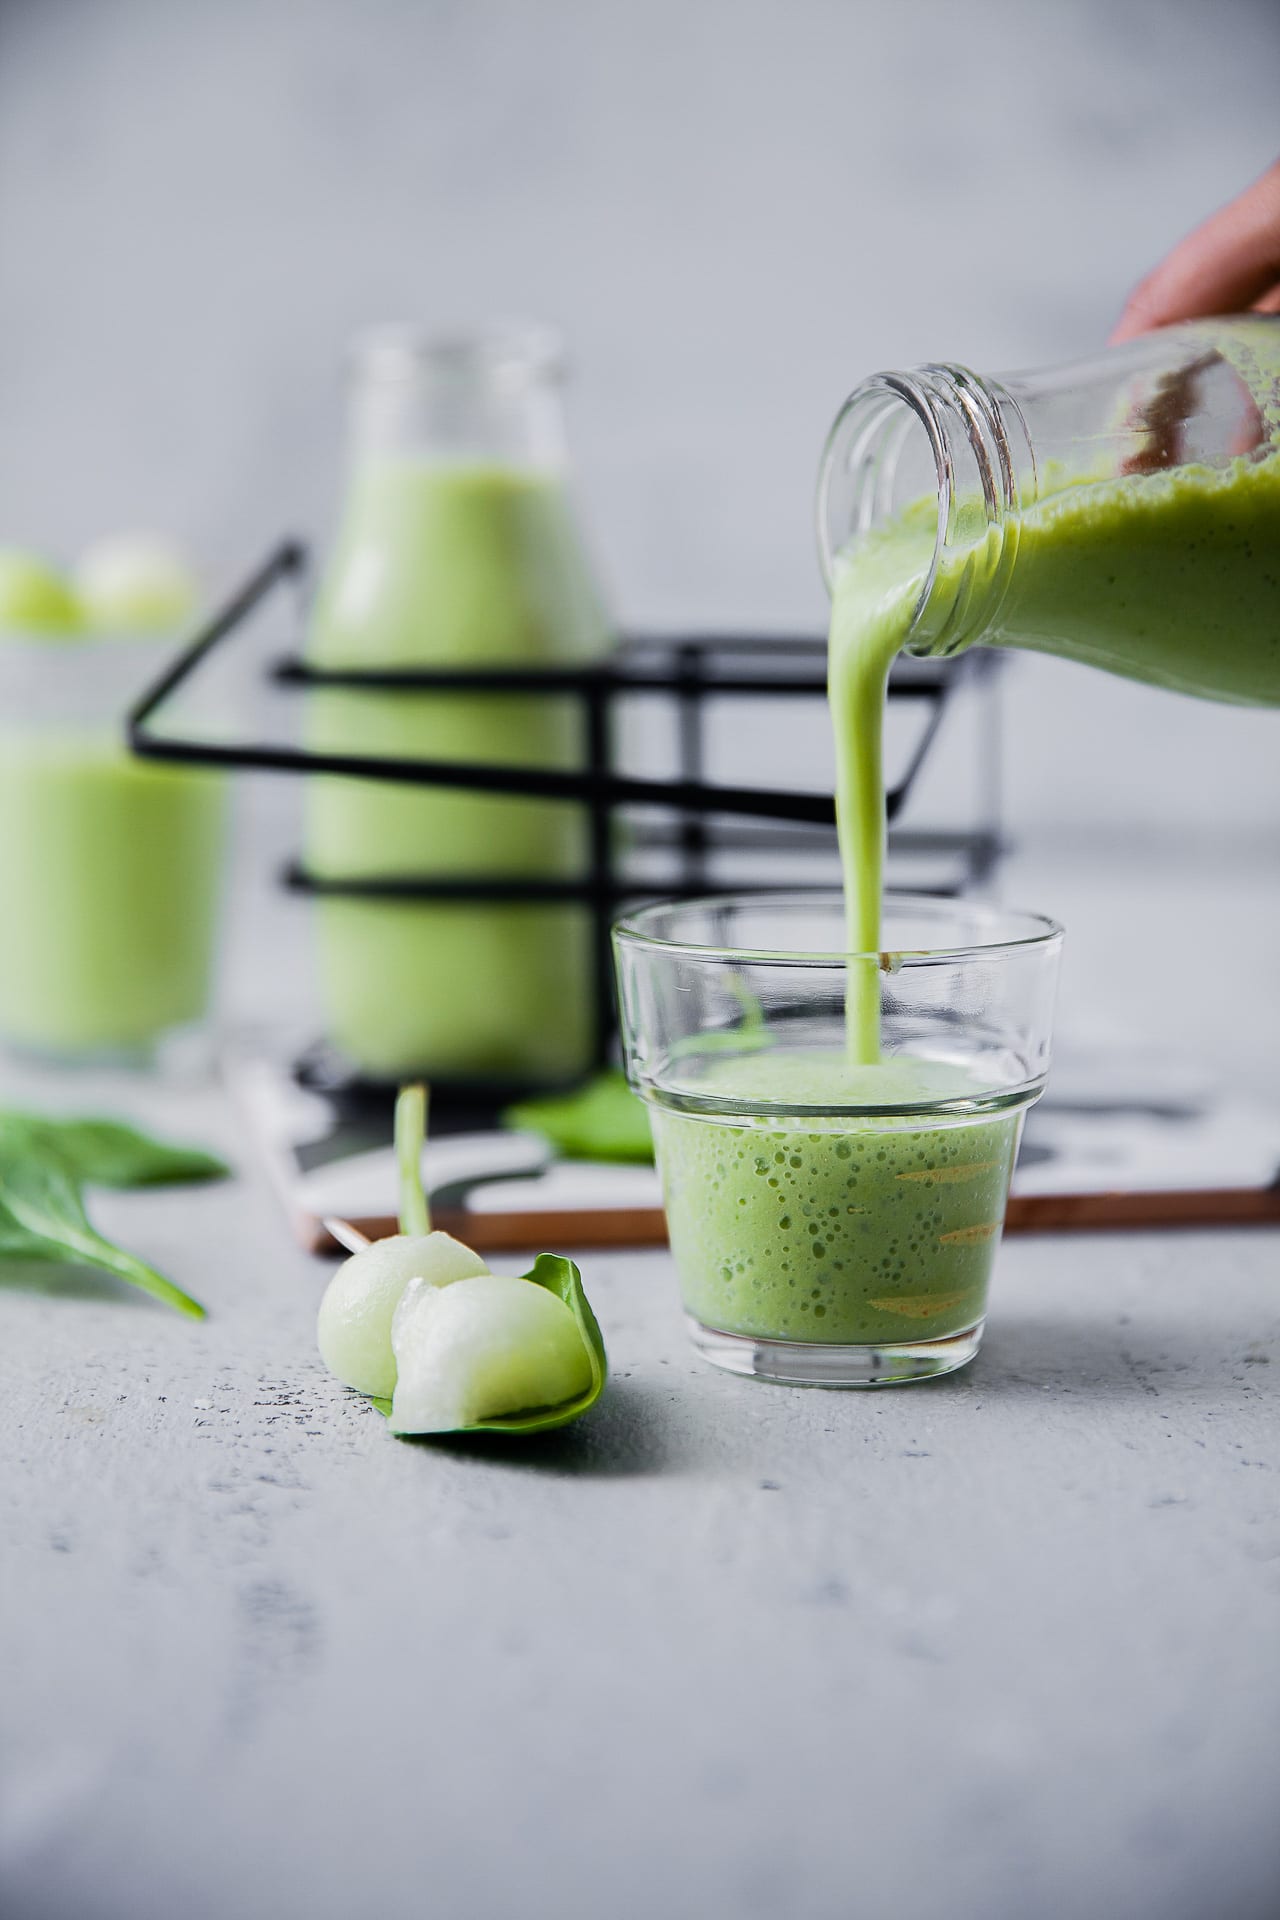 Melon Smoothie (6 INGREDIENTS) | Playful Cooking #smoothie #melon #spinach #foodphotography #drinks